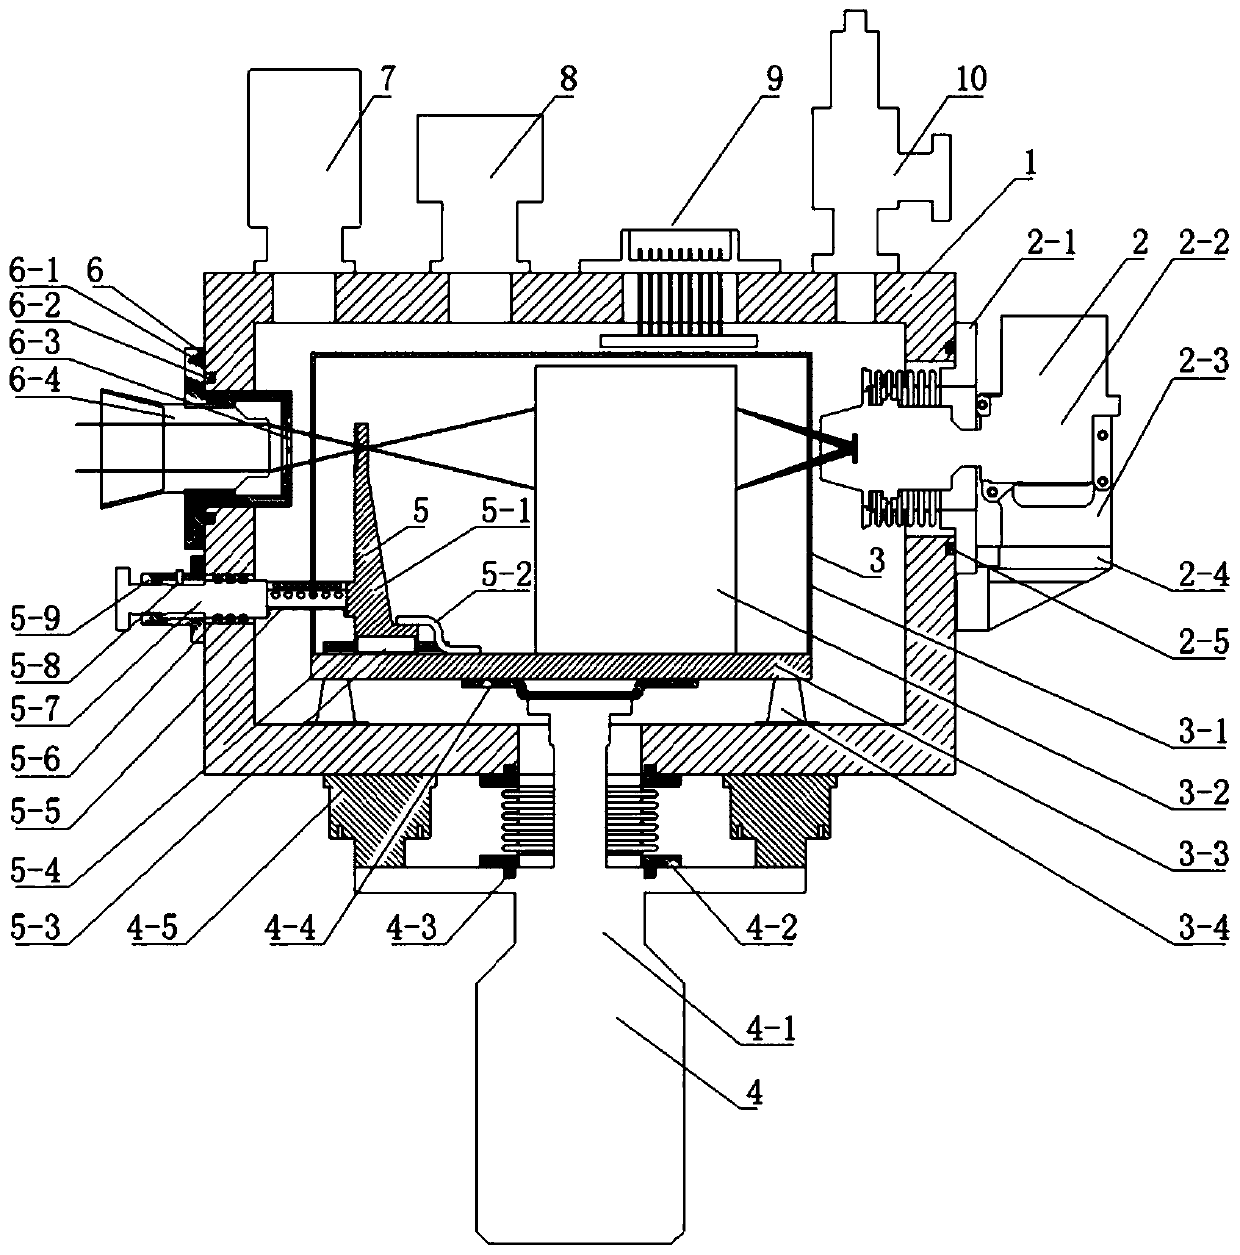 Low-temperature optical mechanical system based on SiC particle reinforced aluminum matrix composite vacuum cooling box